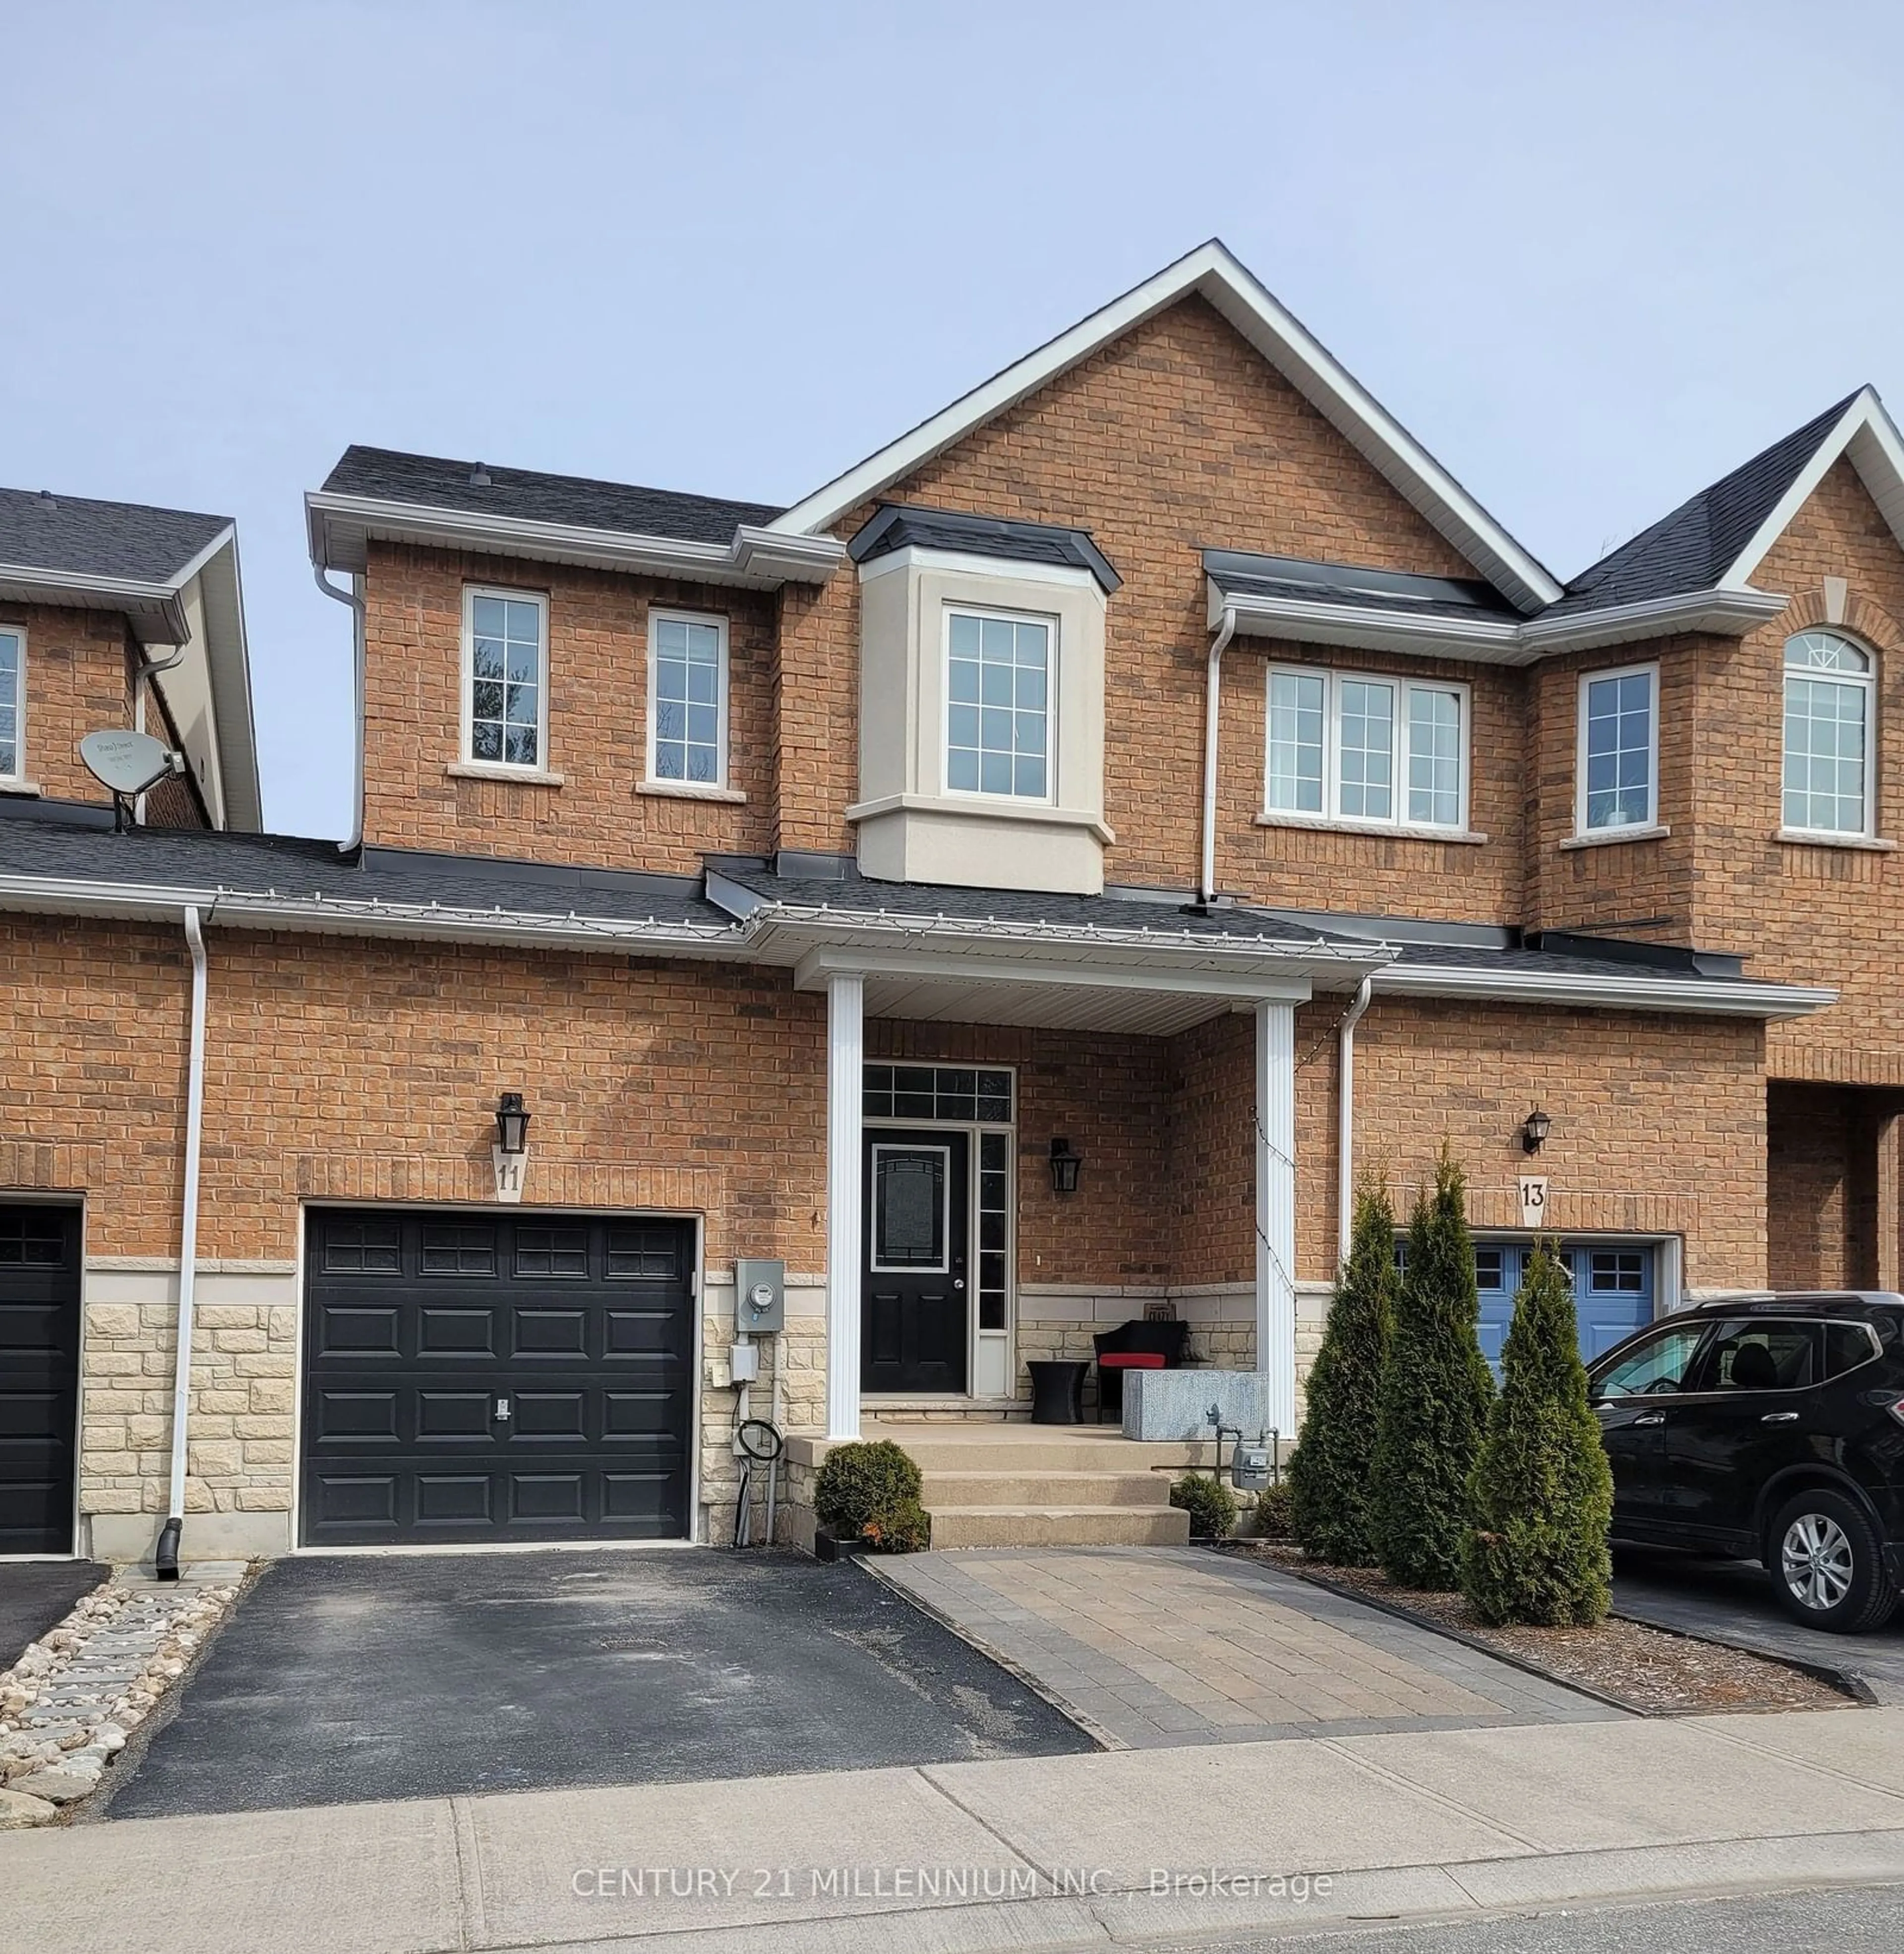 Home with brick exterior material for 11 Farwell Ave, Wasaga Beach Ontario L9Z 0H3